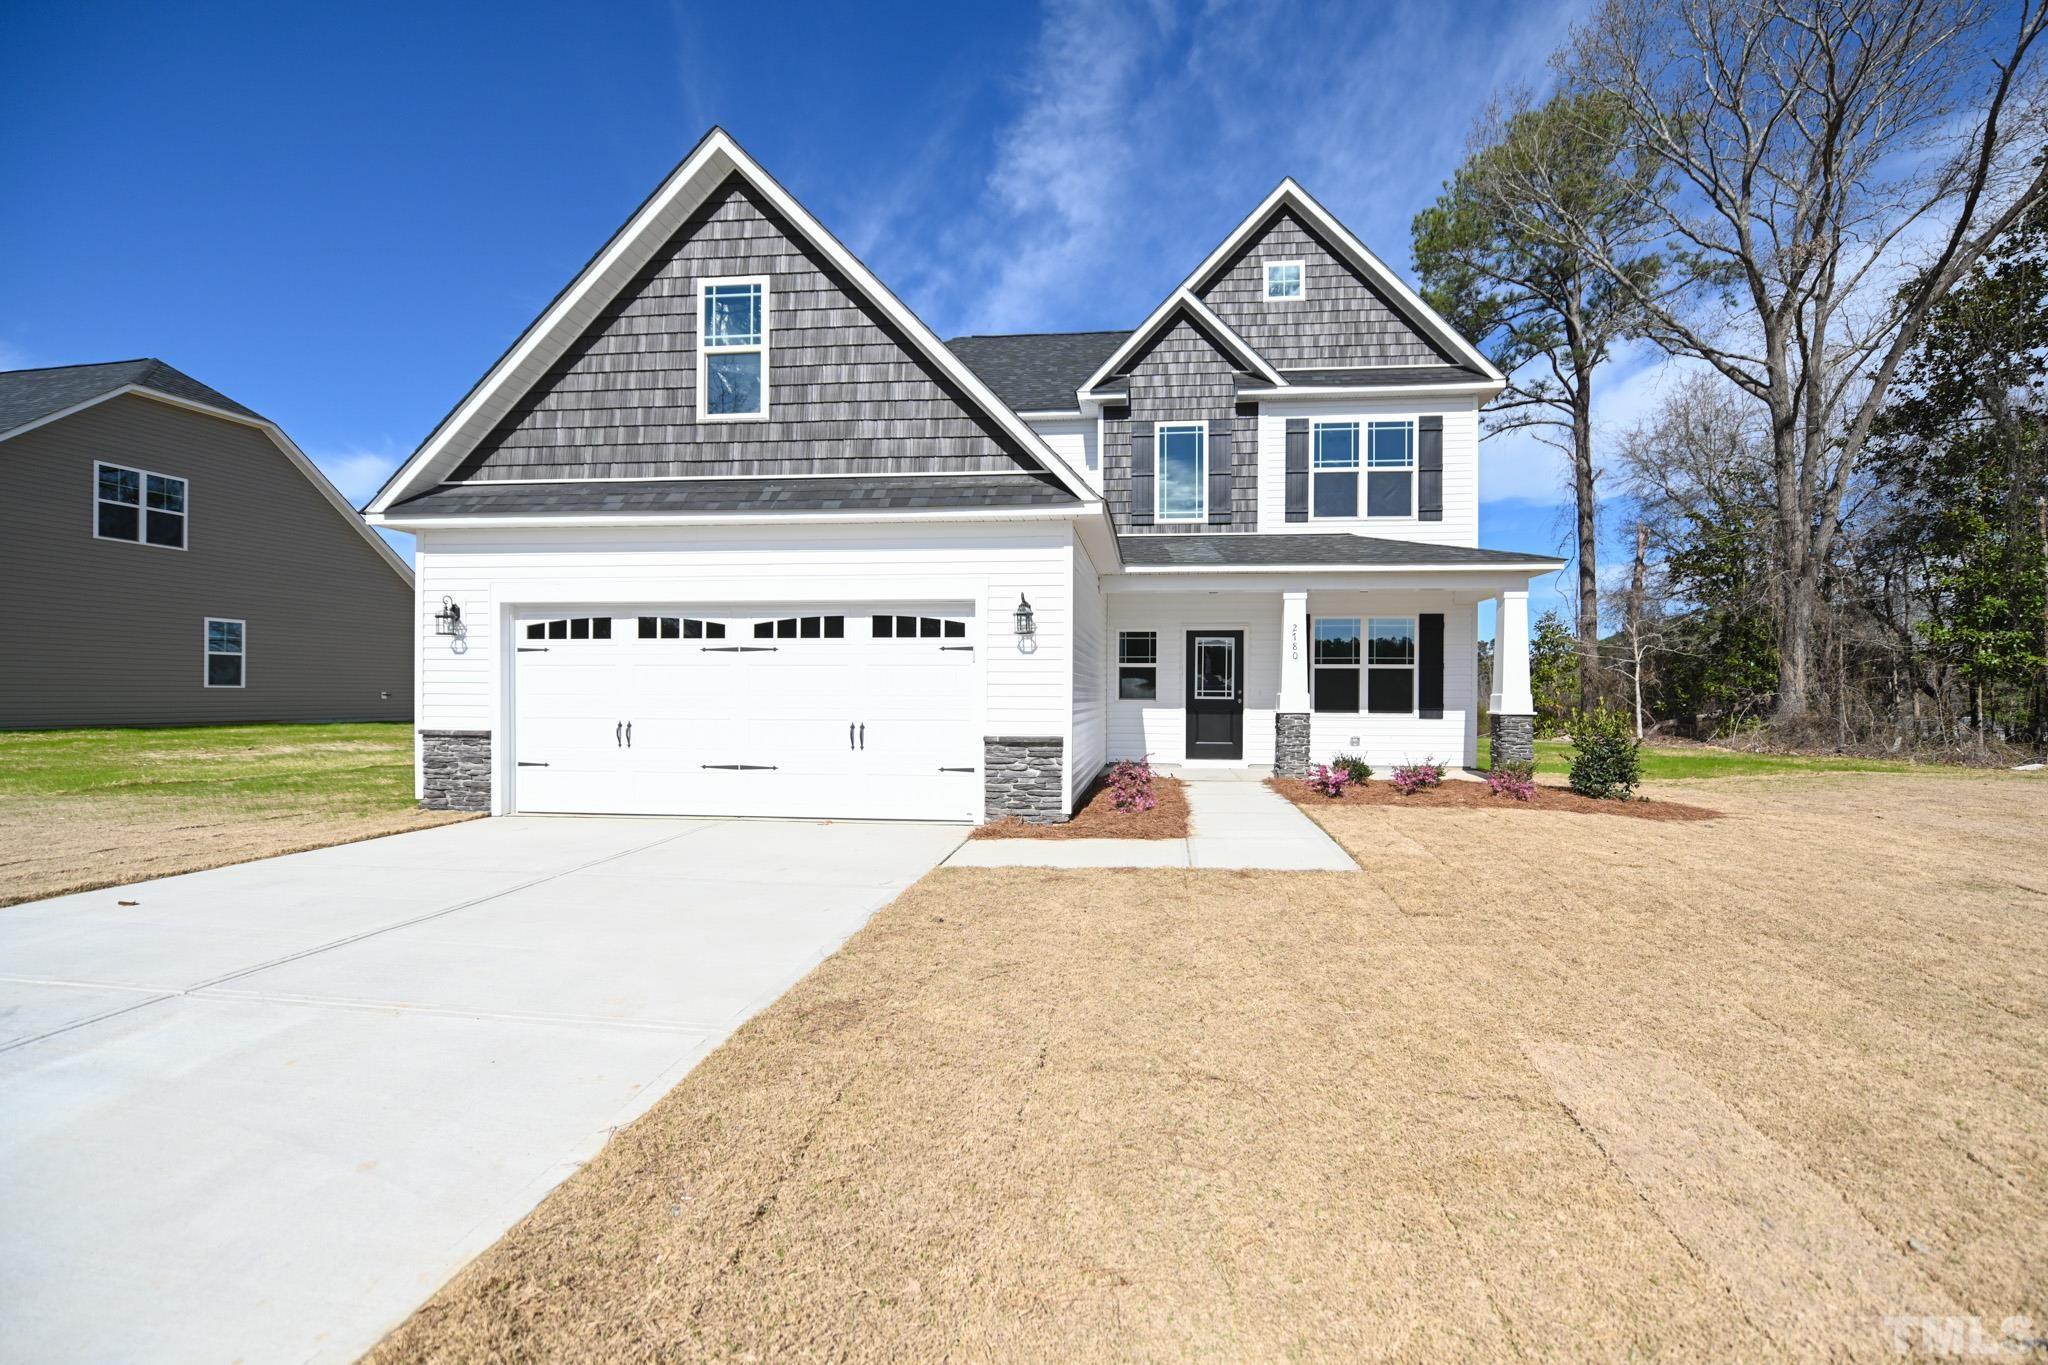 New home for sale in Not in a Subdivision, Smithfield NC